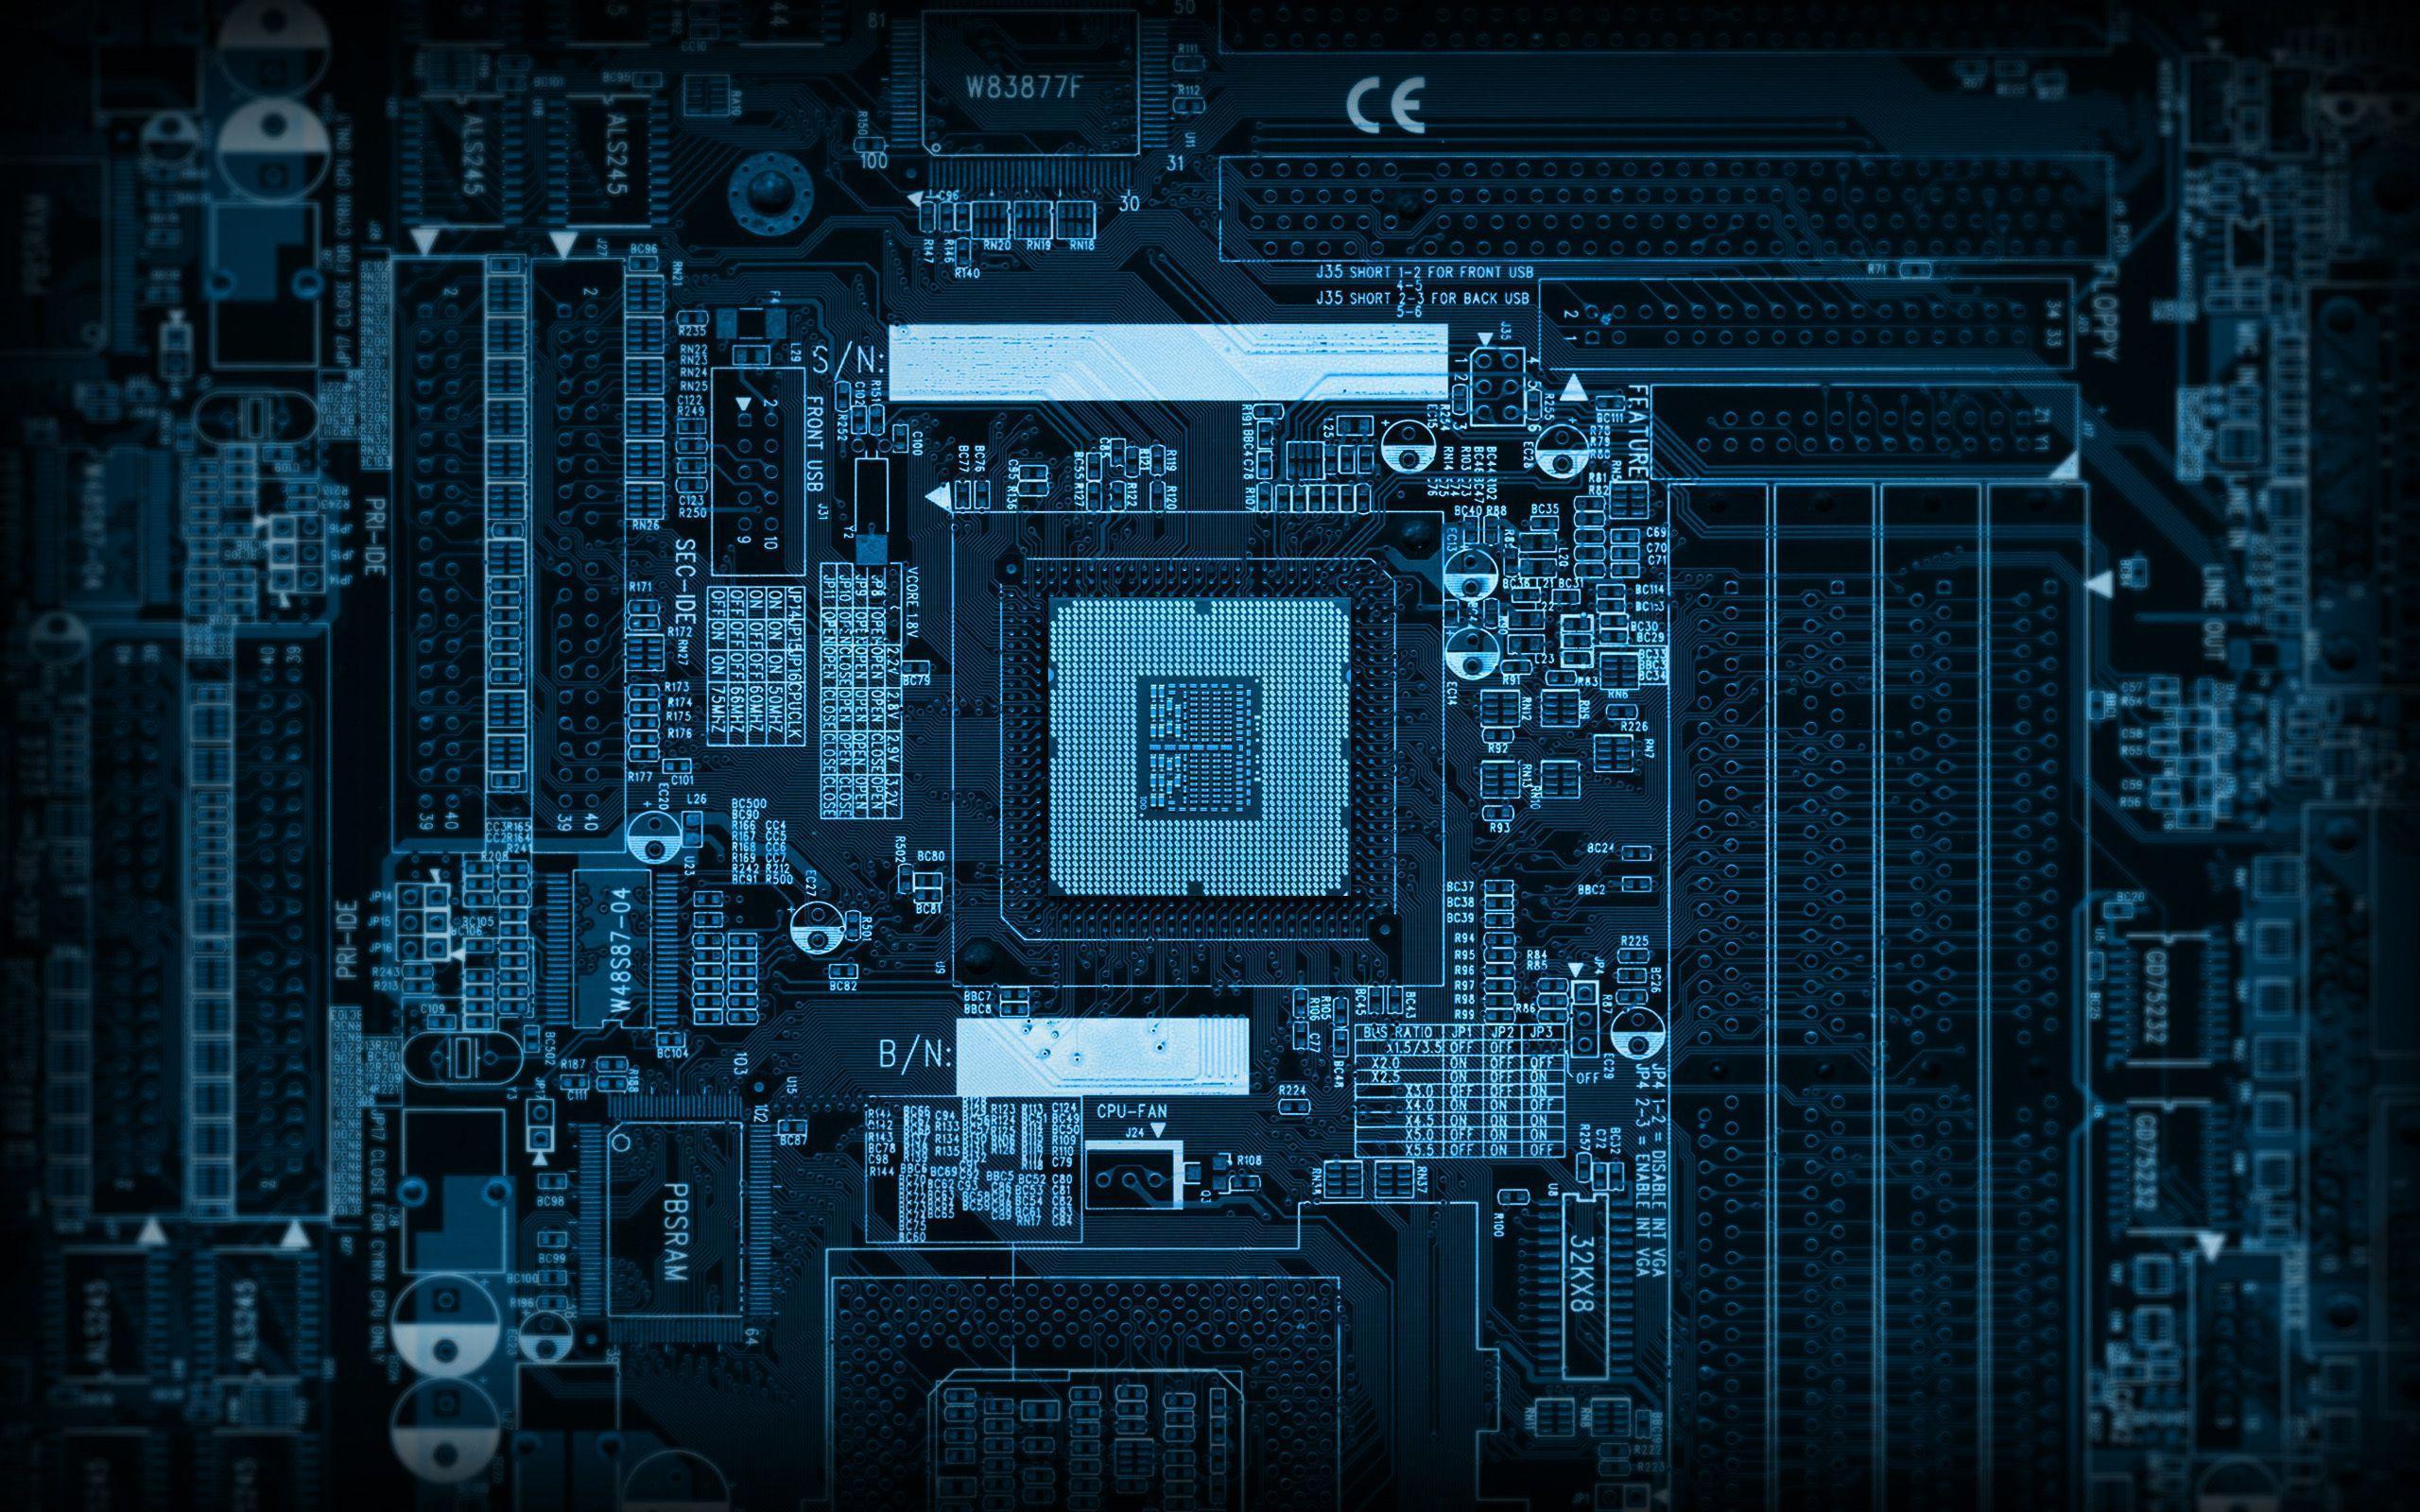 Circuit board Wallpaper. Wide Wallpaper Collections